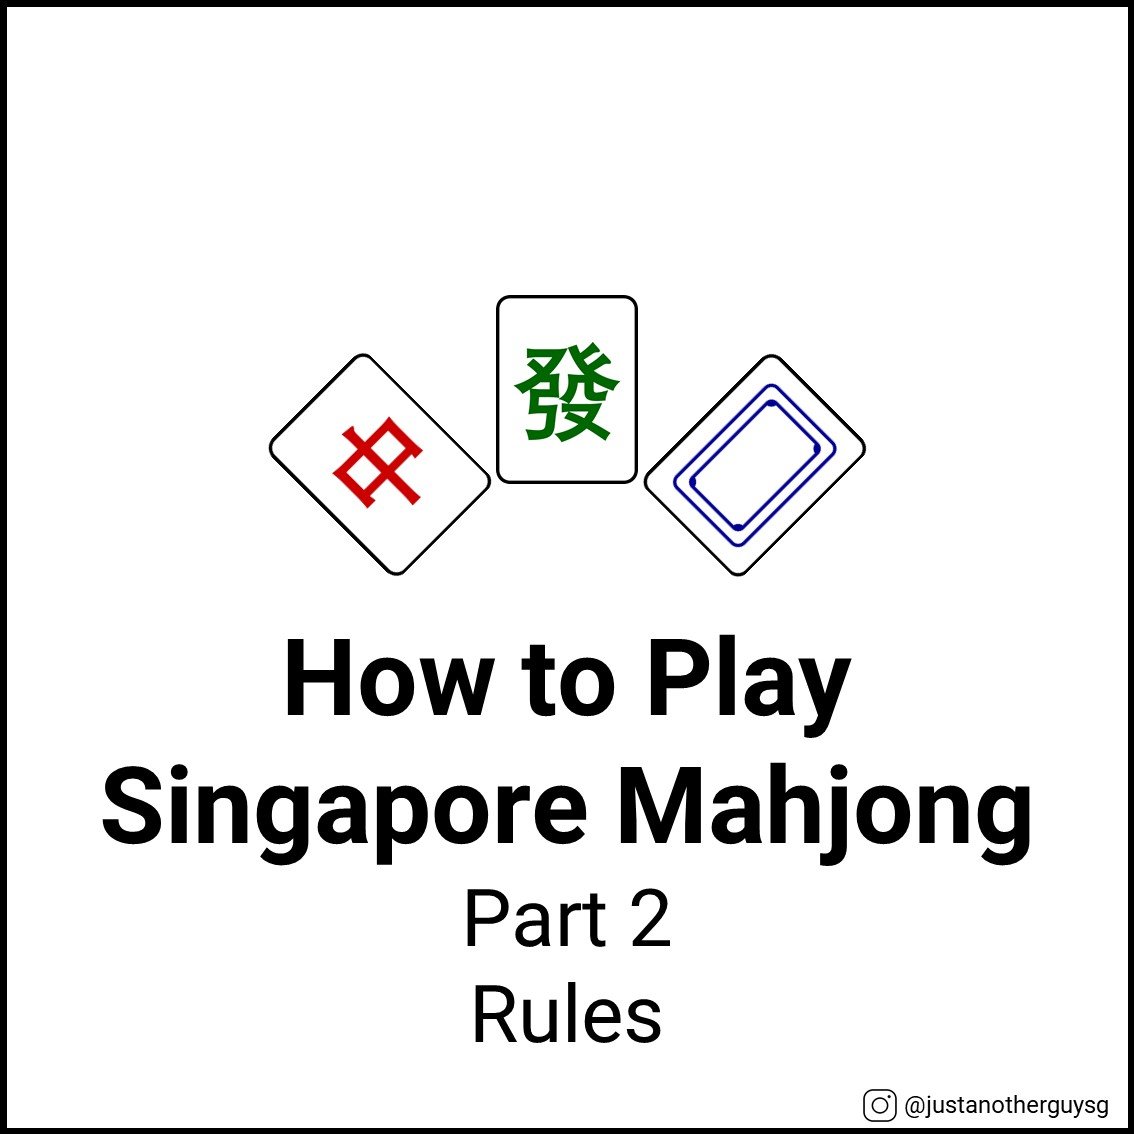 How to Play Mahjong - Part 2 Rules